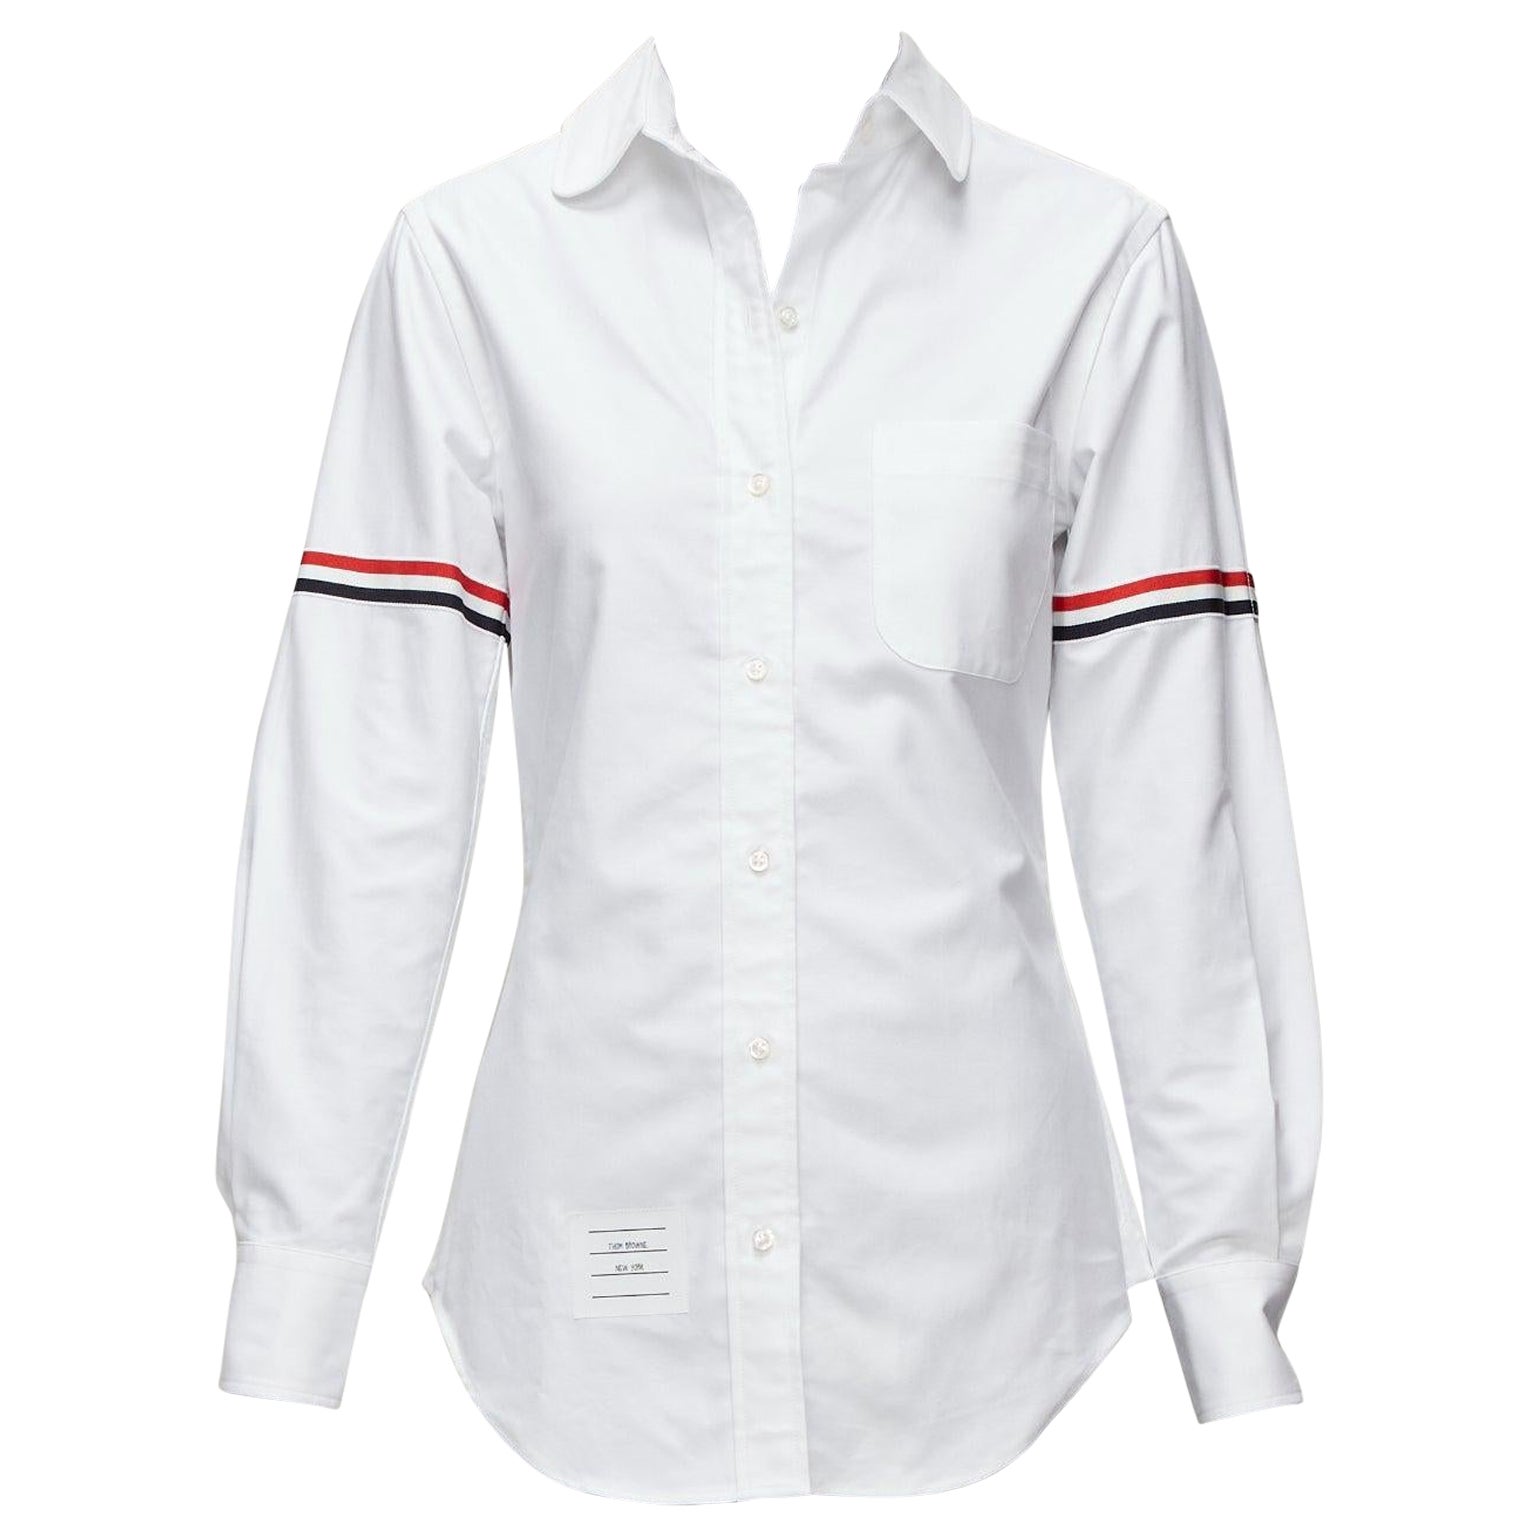 What is the best white dress shirt?